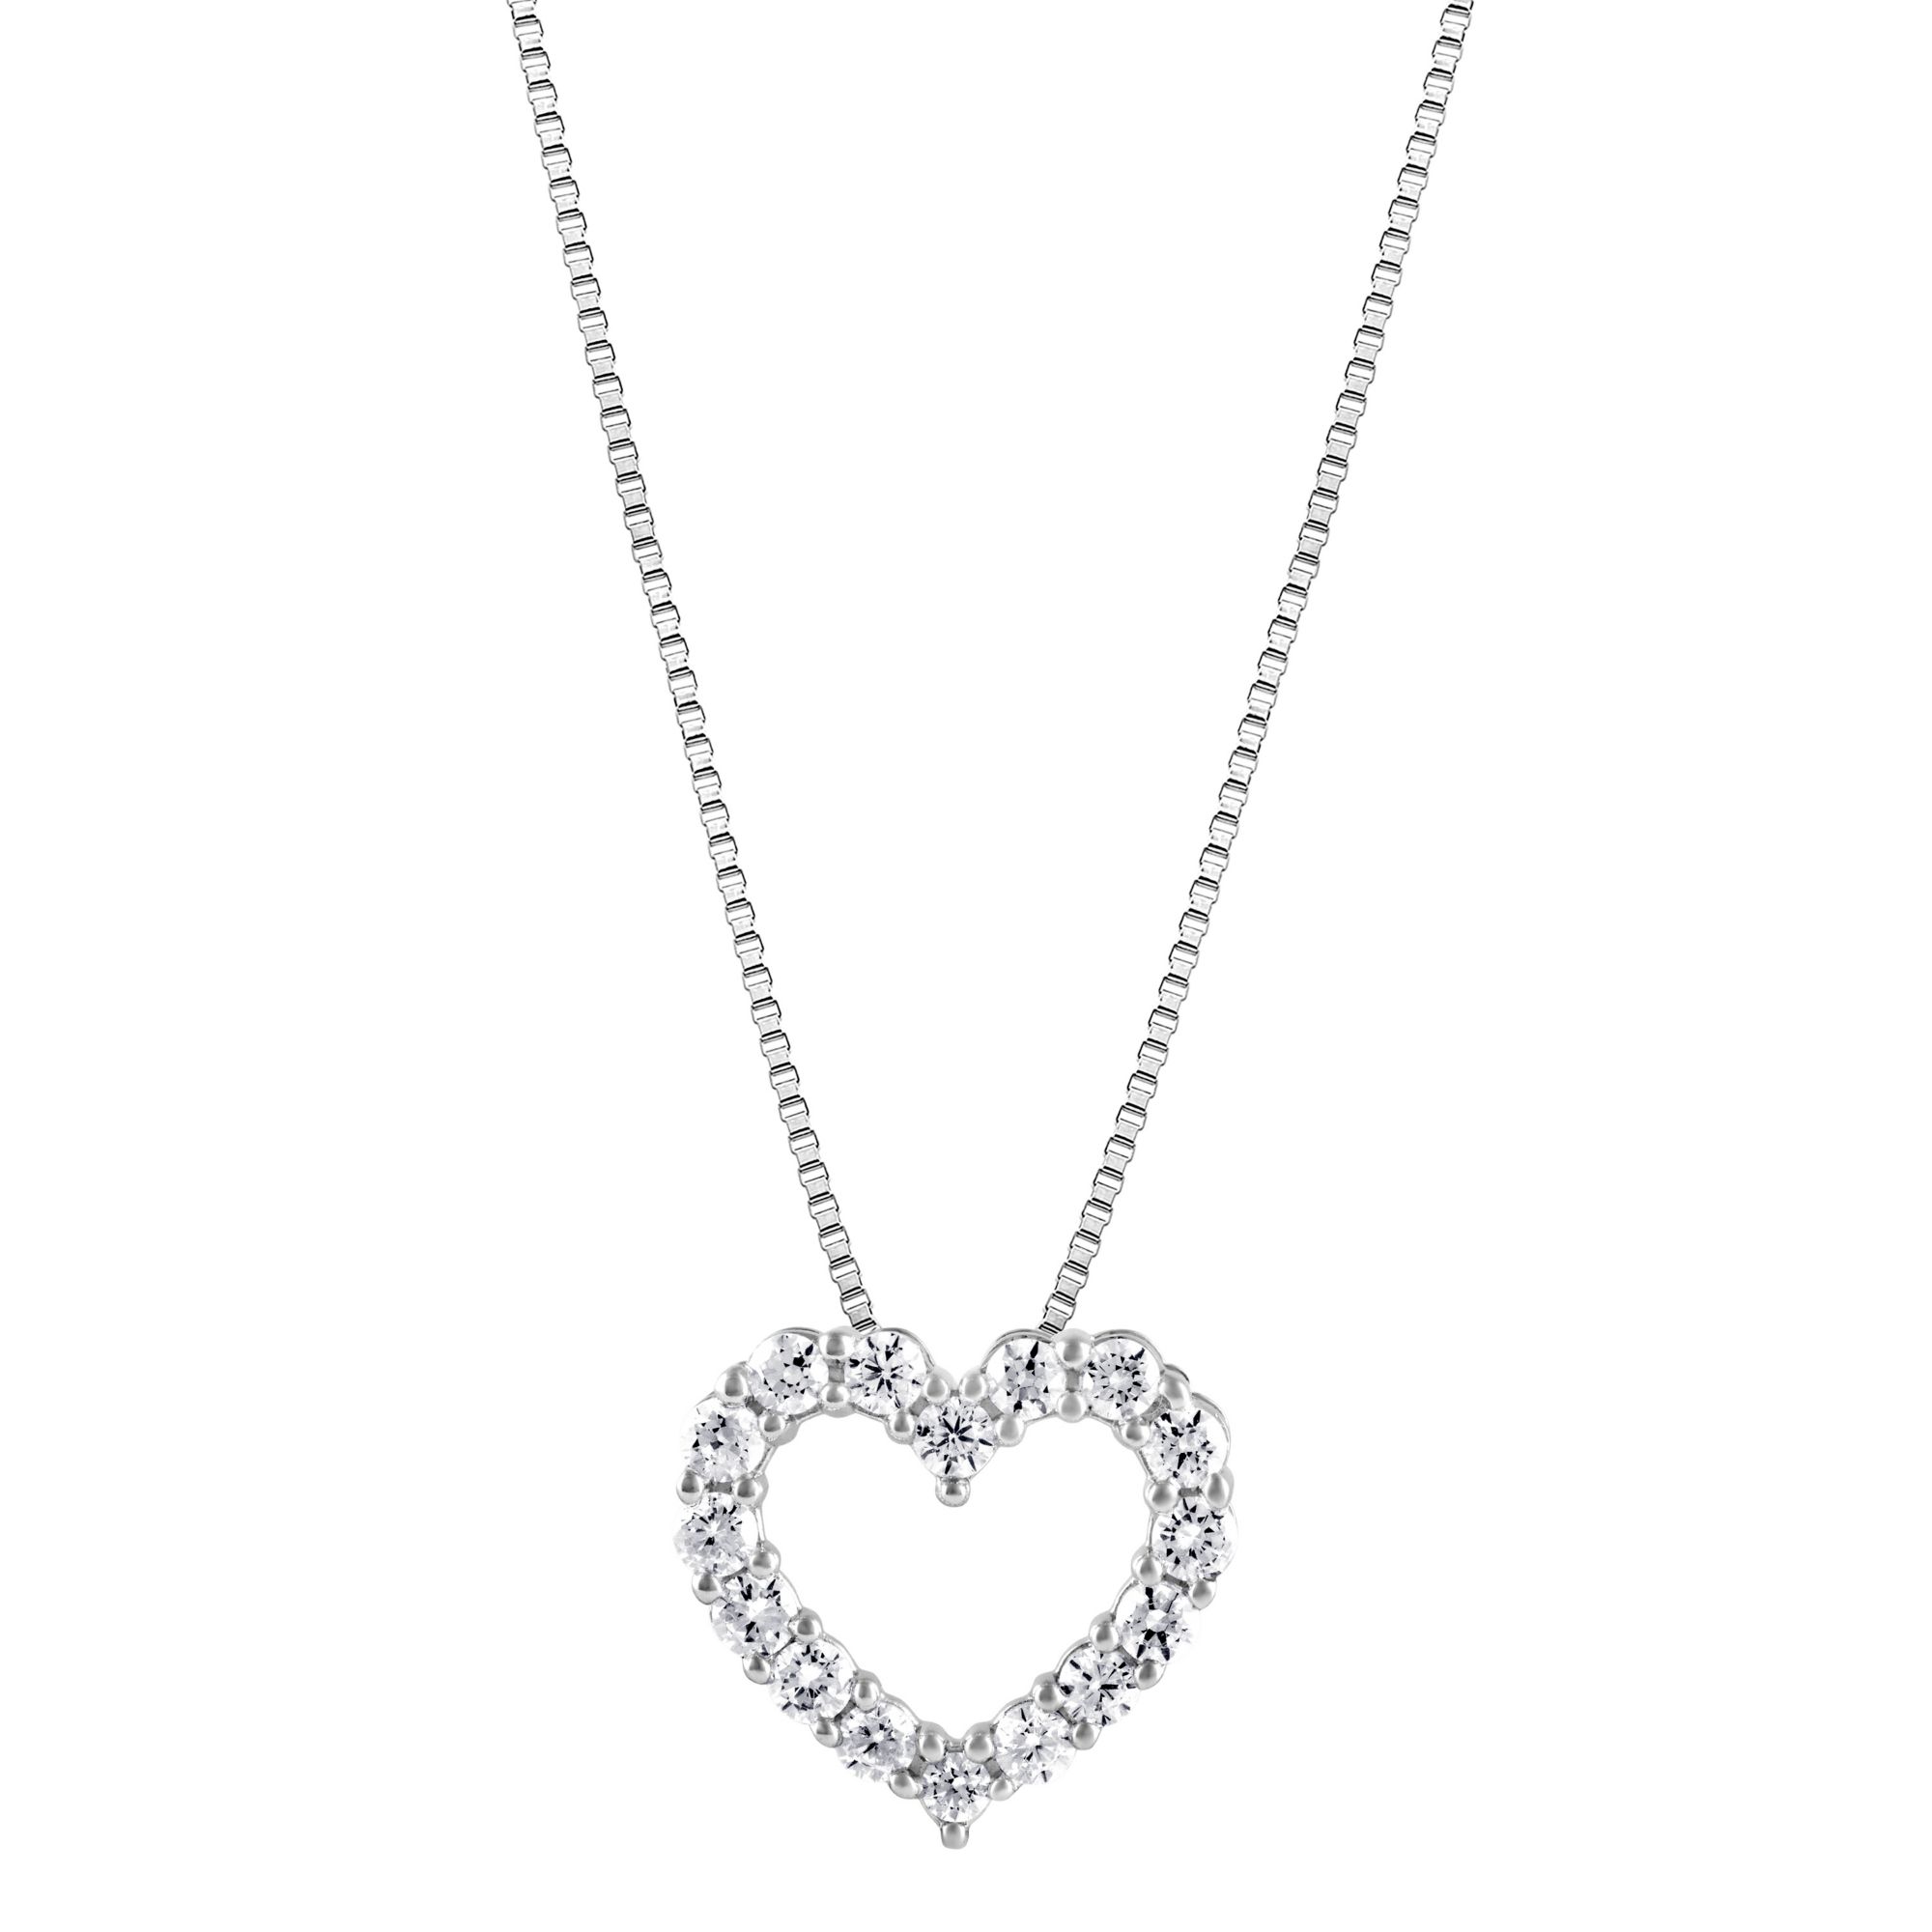 1.00 ct. t.w. Diamond Heart Pendant Necklace in 14k White Gold with Chain